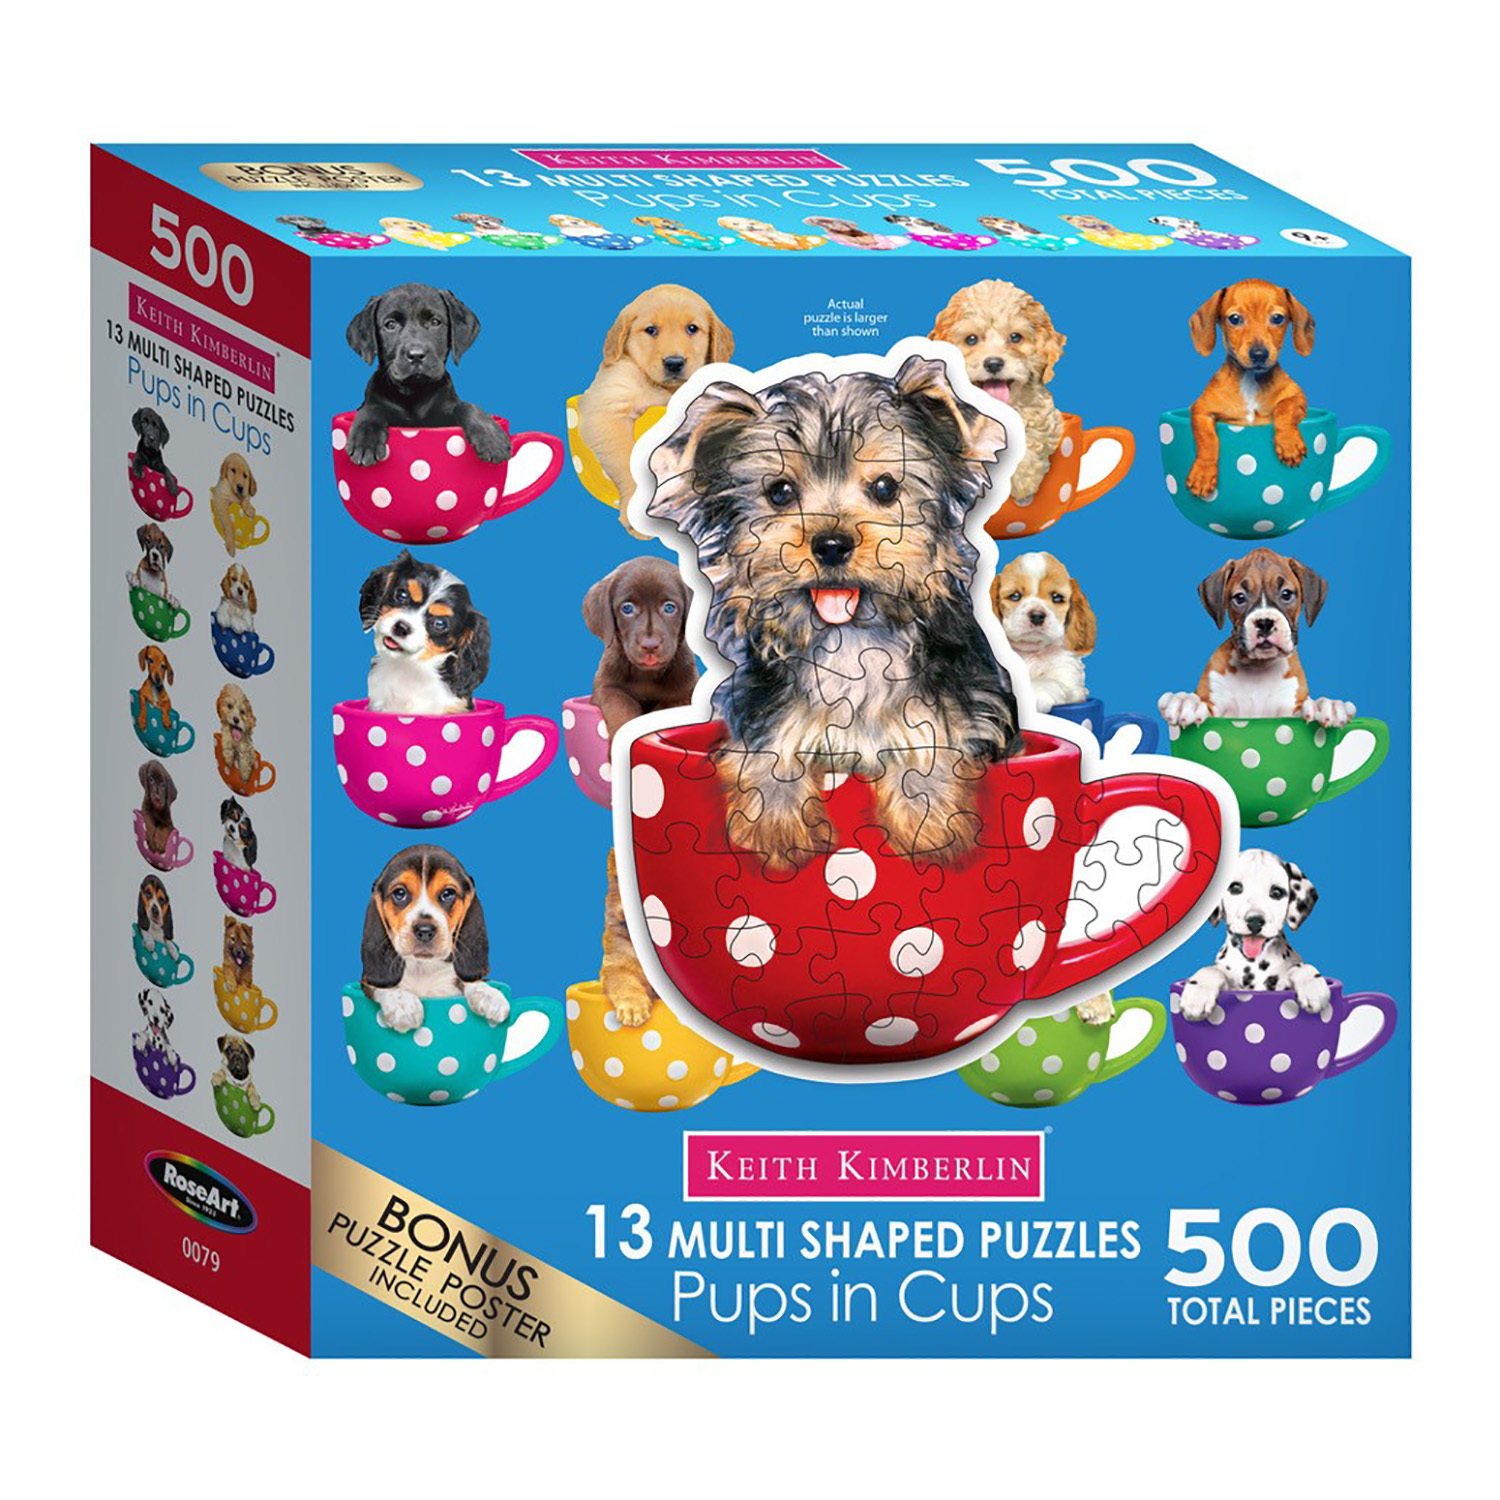 Pups in Cups - 13 Mini Shaped Puzzles